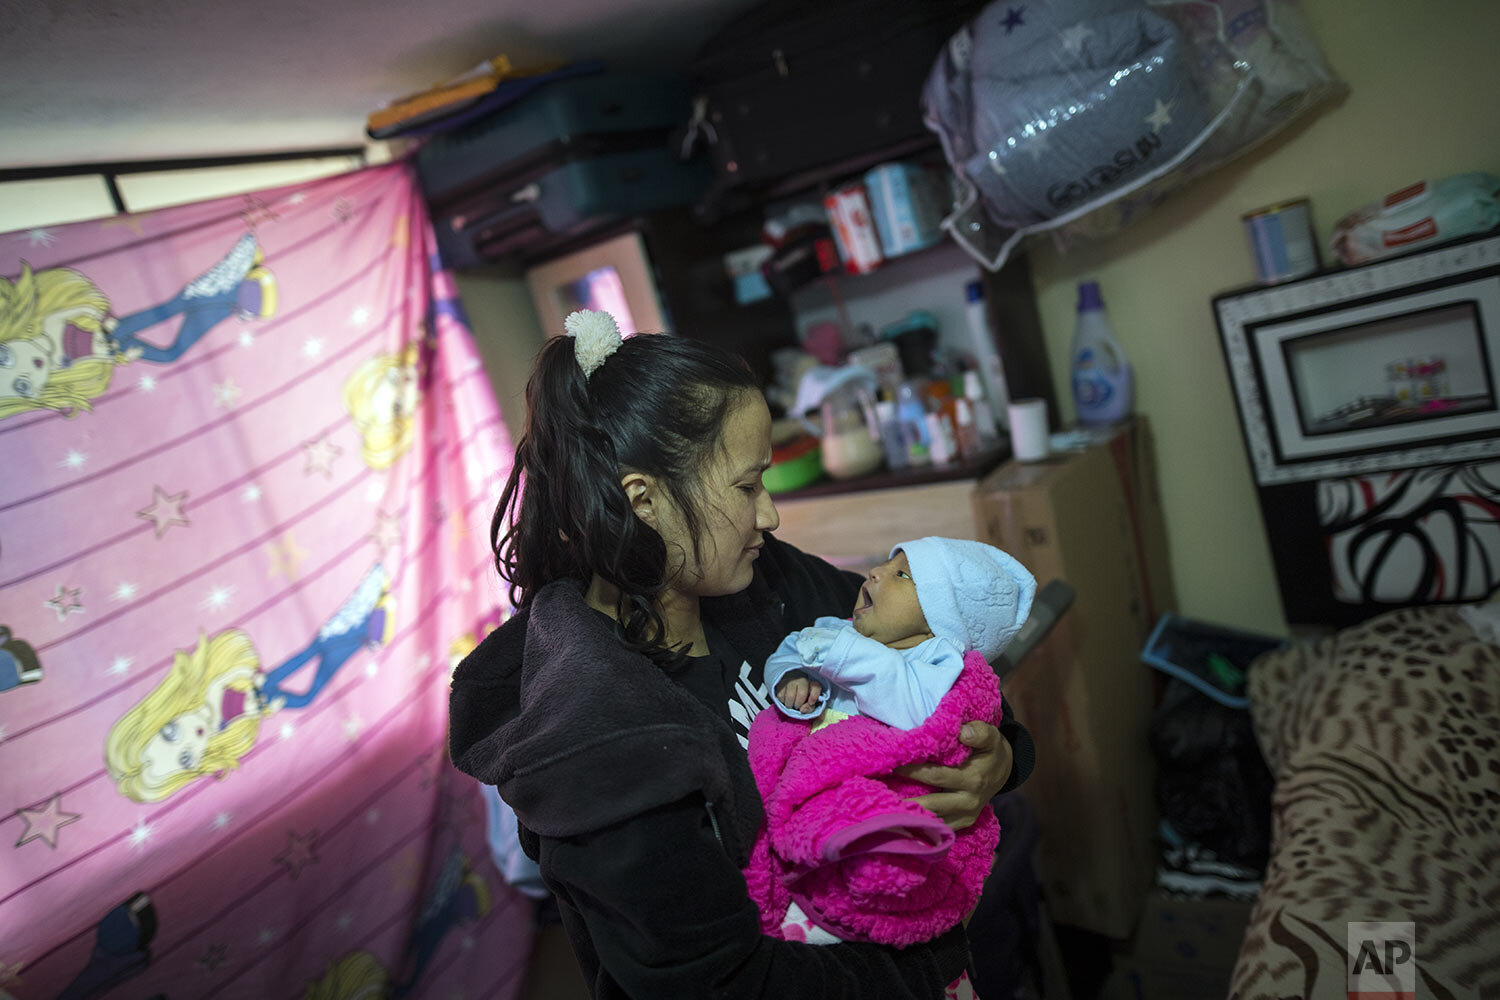  Maria Alvarez cradles her 6-day-old daughter, in the home of friend who has offered her a place to stay, in Lima, Peru, Tuesday, Aug 4, 2020. (AP Photo/Rodrigo Abd) 